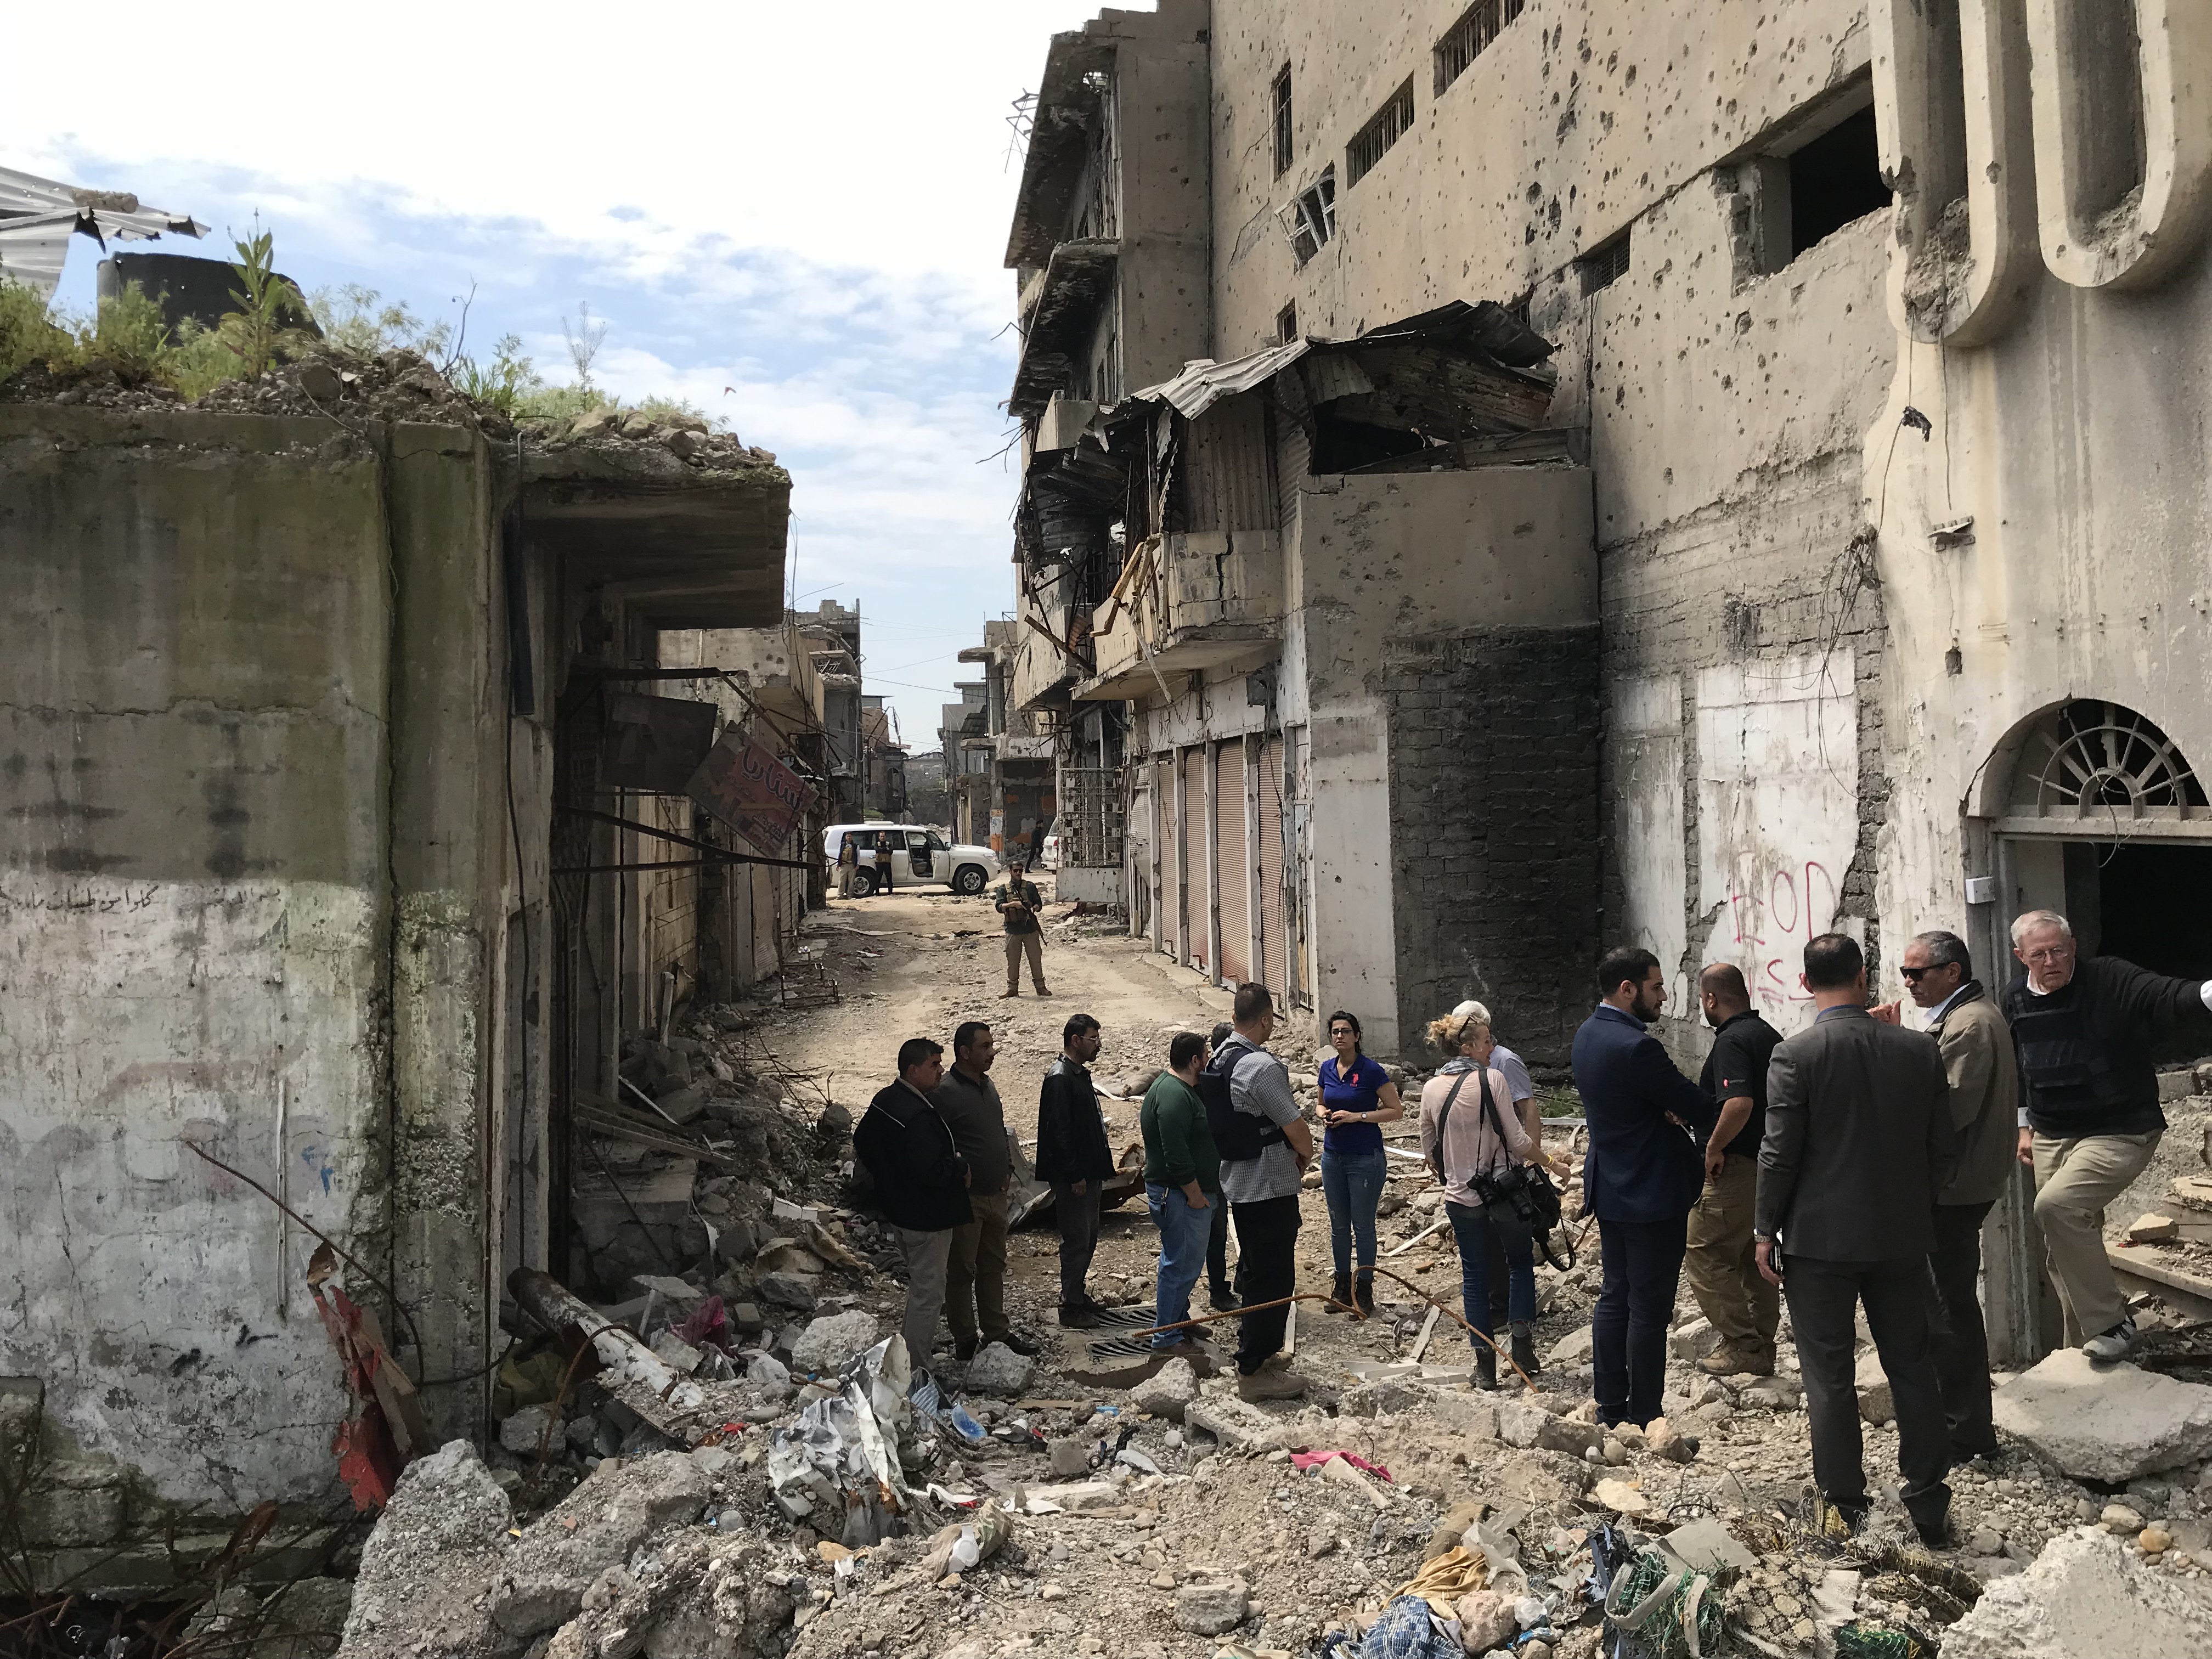 group of people surveying destroyed buildings